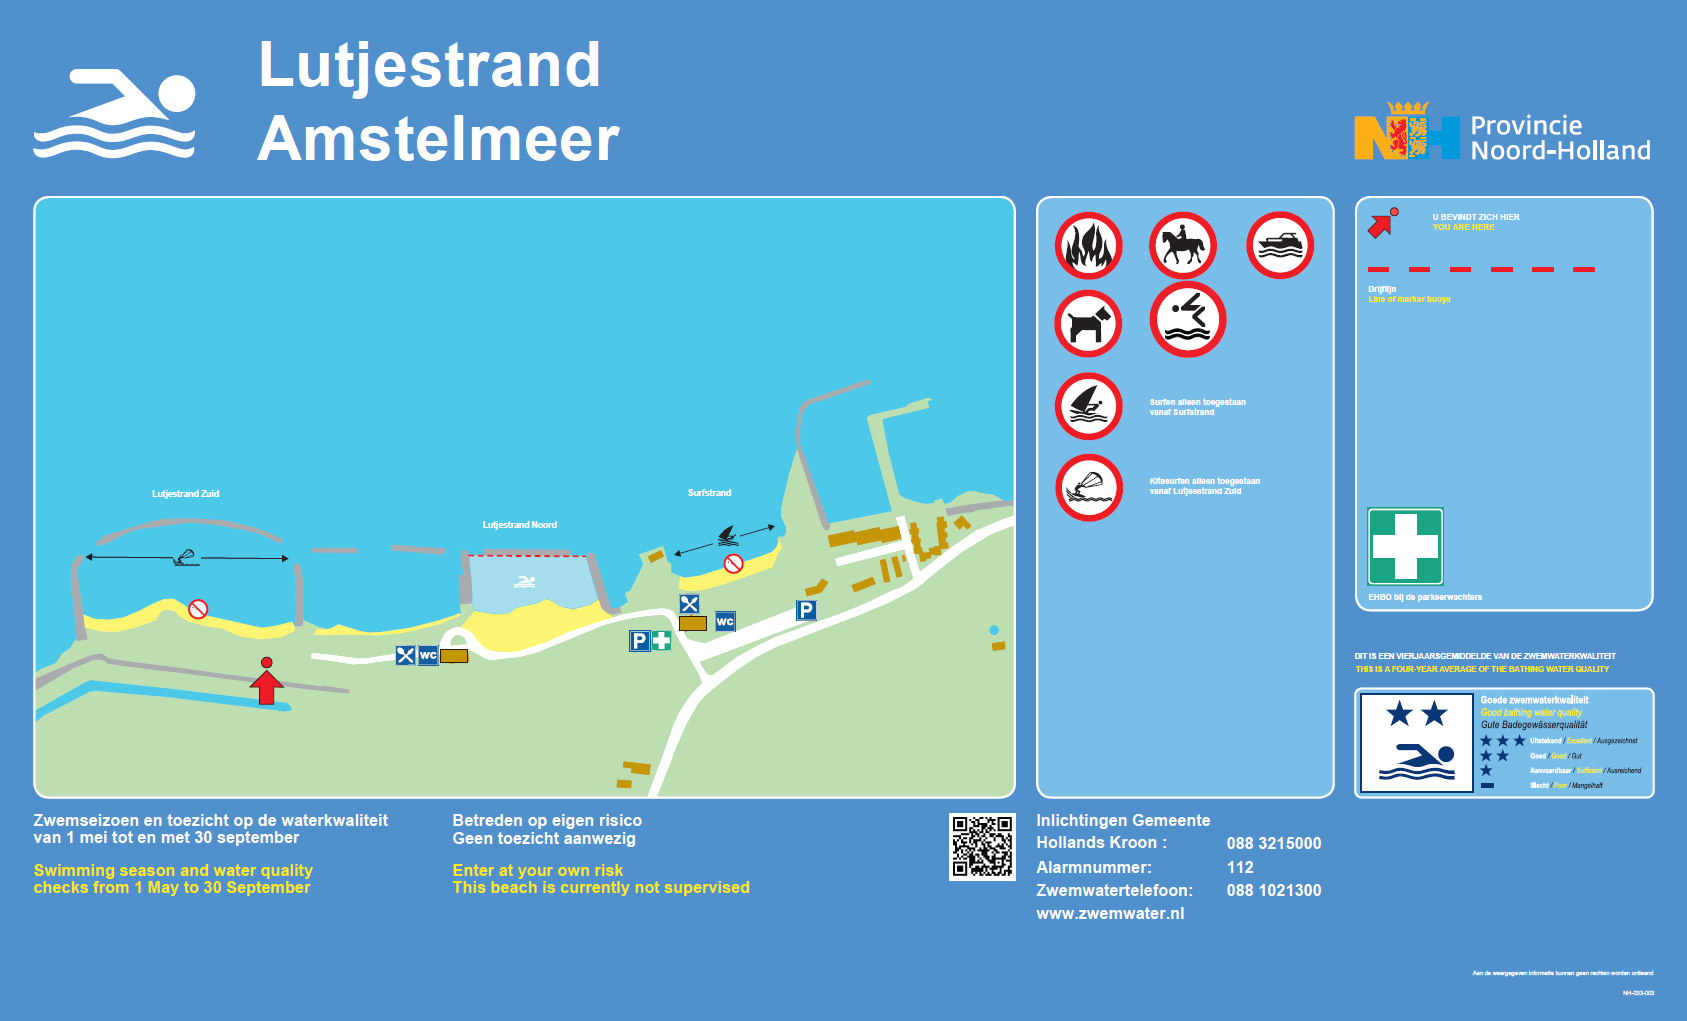 The information board at the swimming location Lutjestrand, Amstelmeer